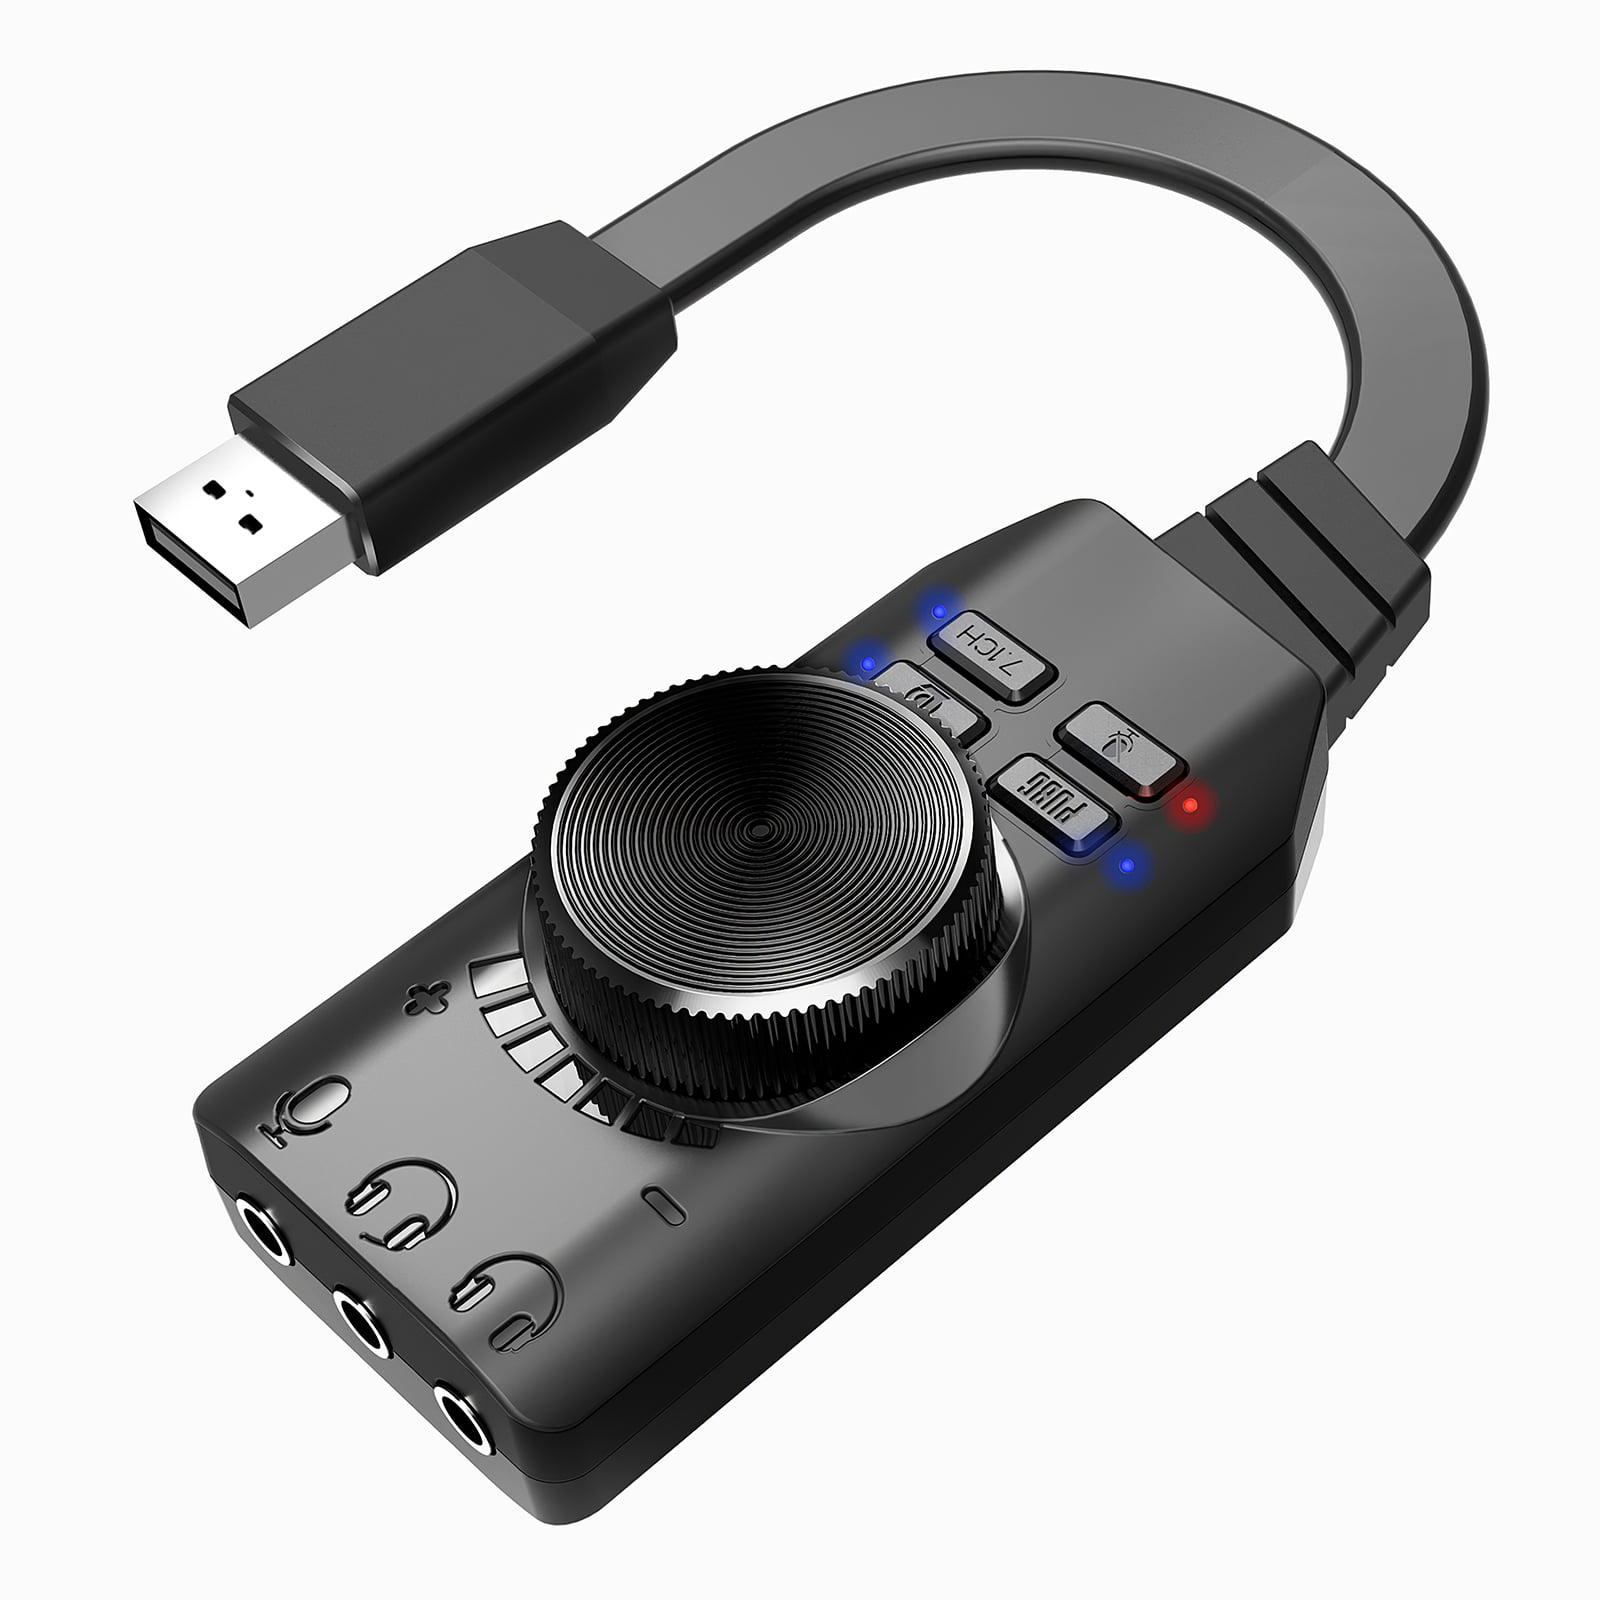 Black Headset Color : Black Speakers Desktop Computer Accessories Aluminum Shell 3.5mm Jack External USB Sound Card HiFi Magic Voice 7.1 Channel Adapter Free Drive for Computer 